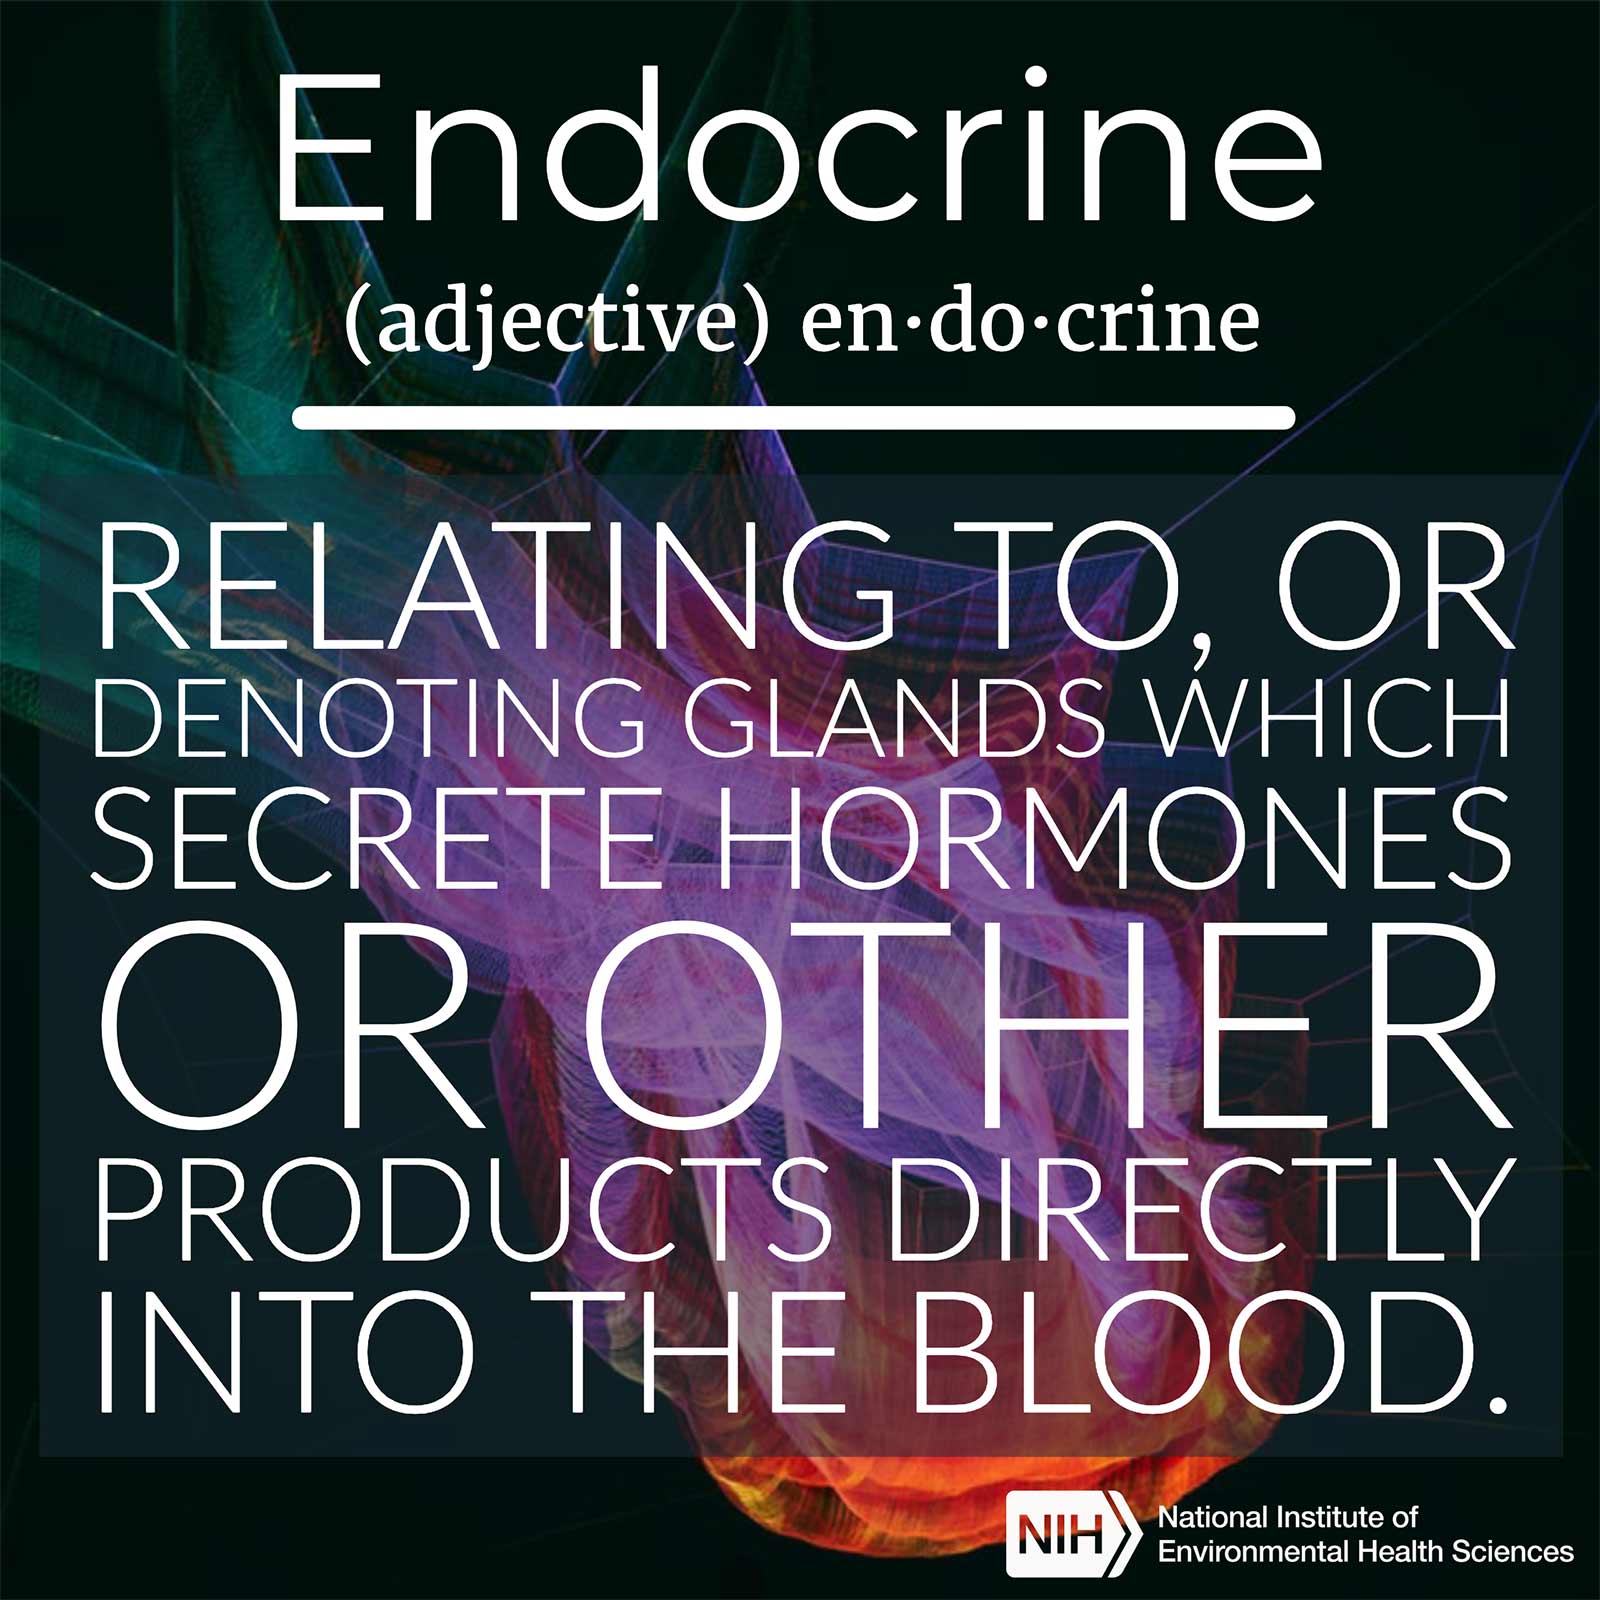 Endocrine (adjective) defined as 'Relating to, or denoting glands which secrete hormones or other products directly into the blood'